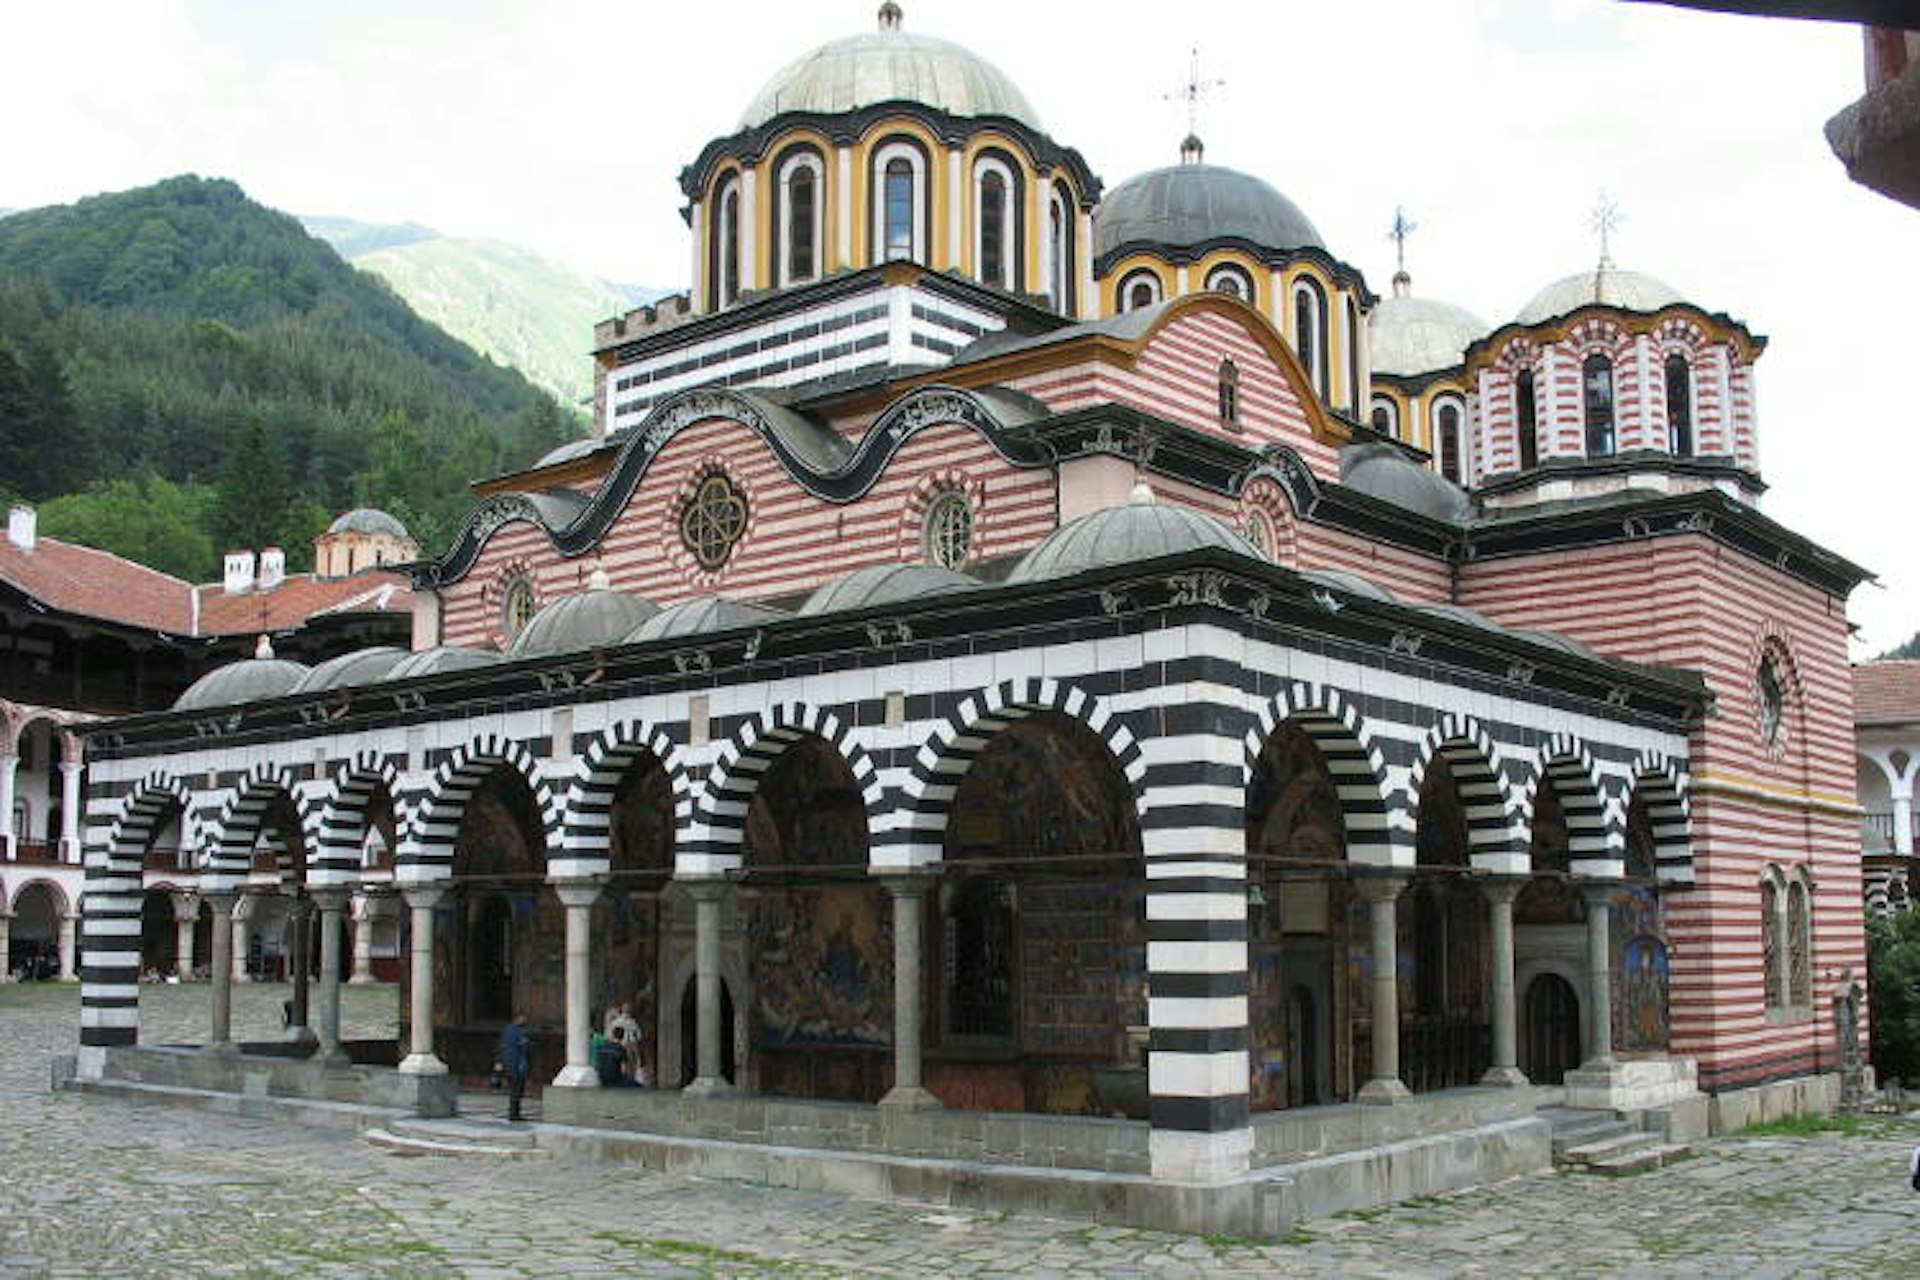 Forest-framed medieval Rila Monastery. Image by Esther Westerveld / CC BY 2.0